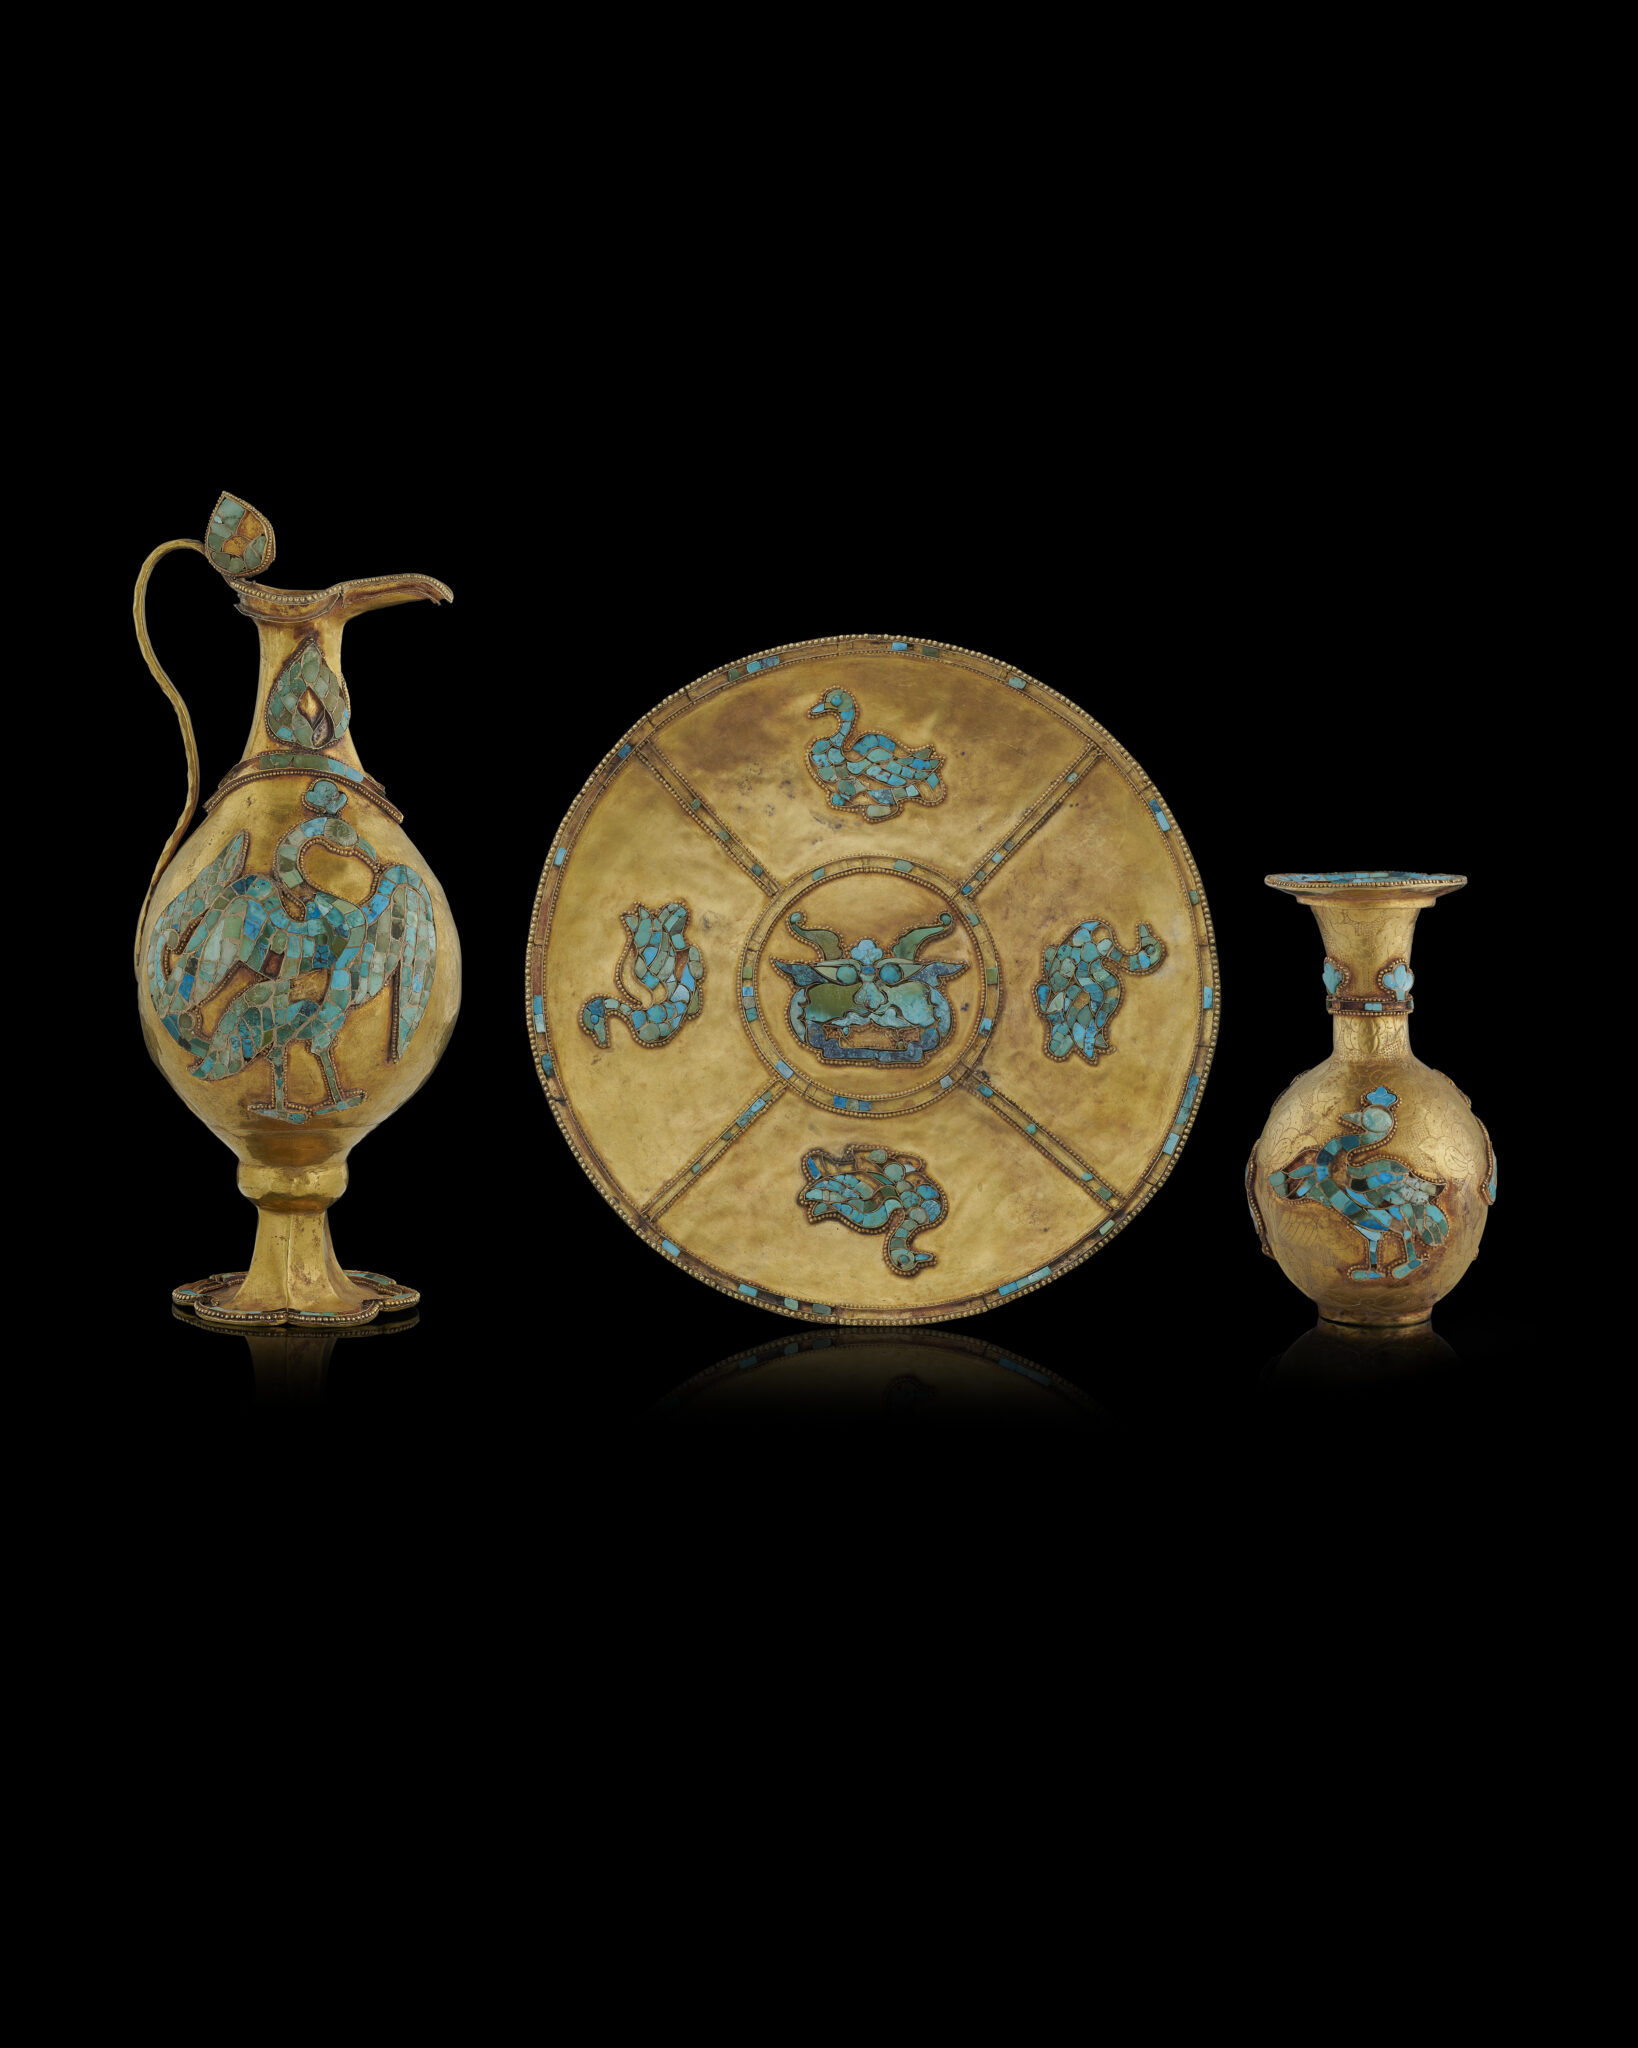 Three golden dinnerware pieces (ewer, plate, decanter) decorated with birds set in turquoise stones